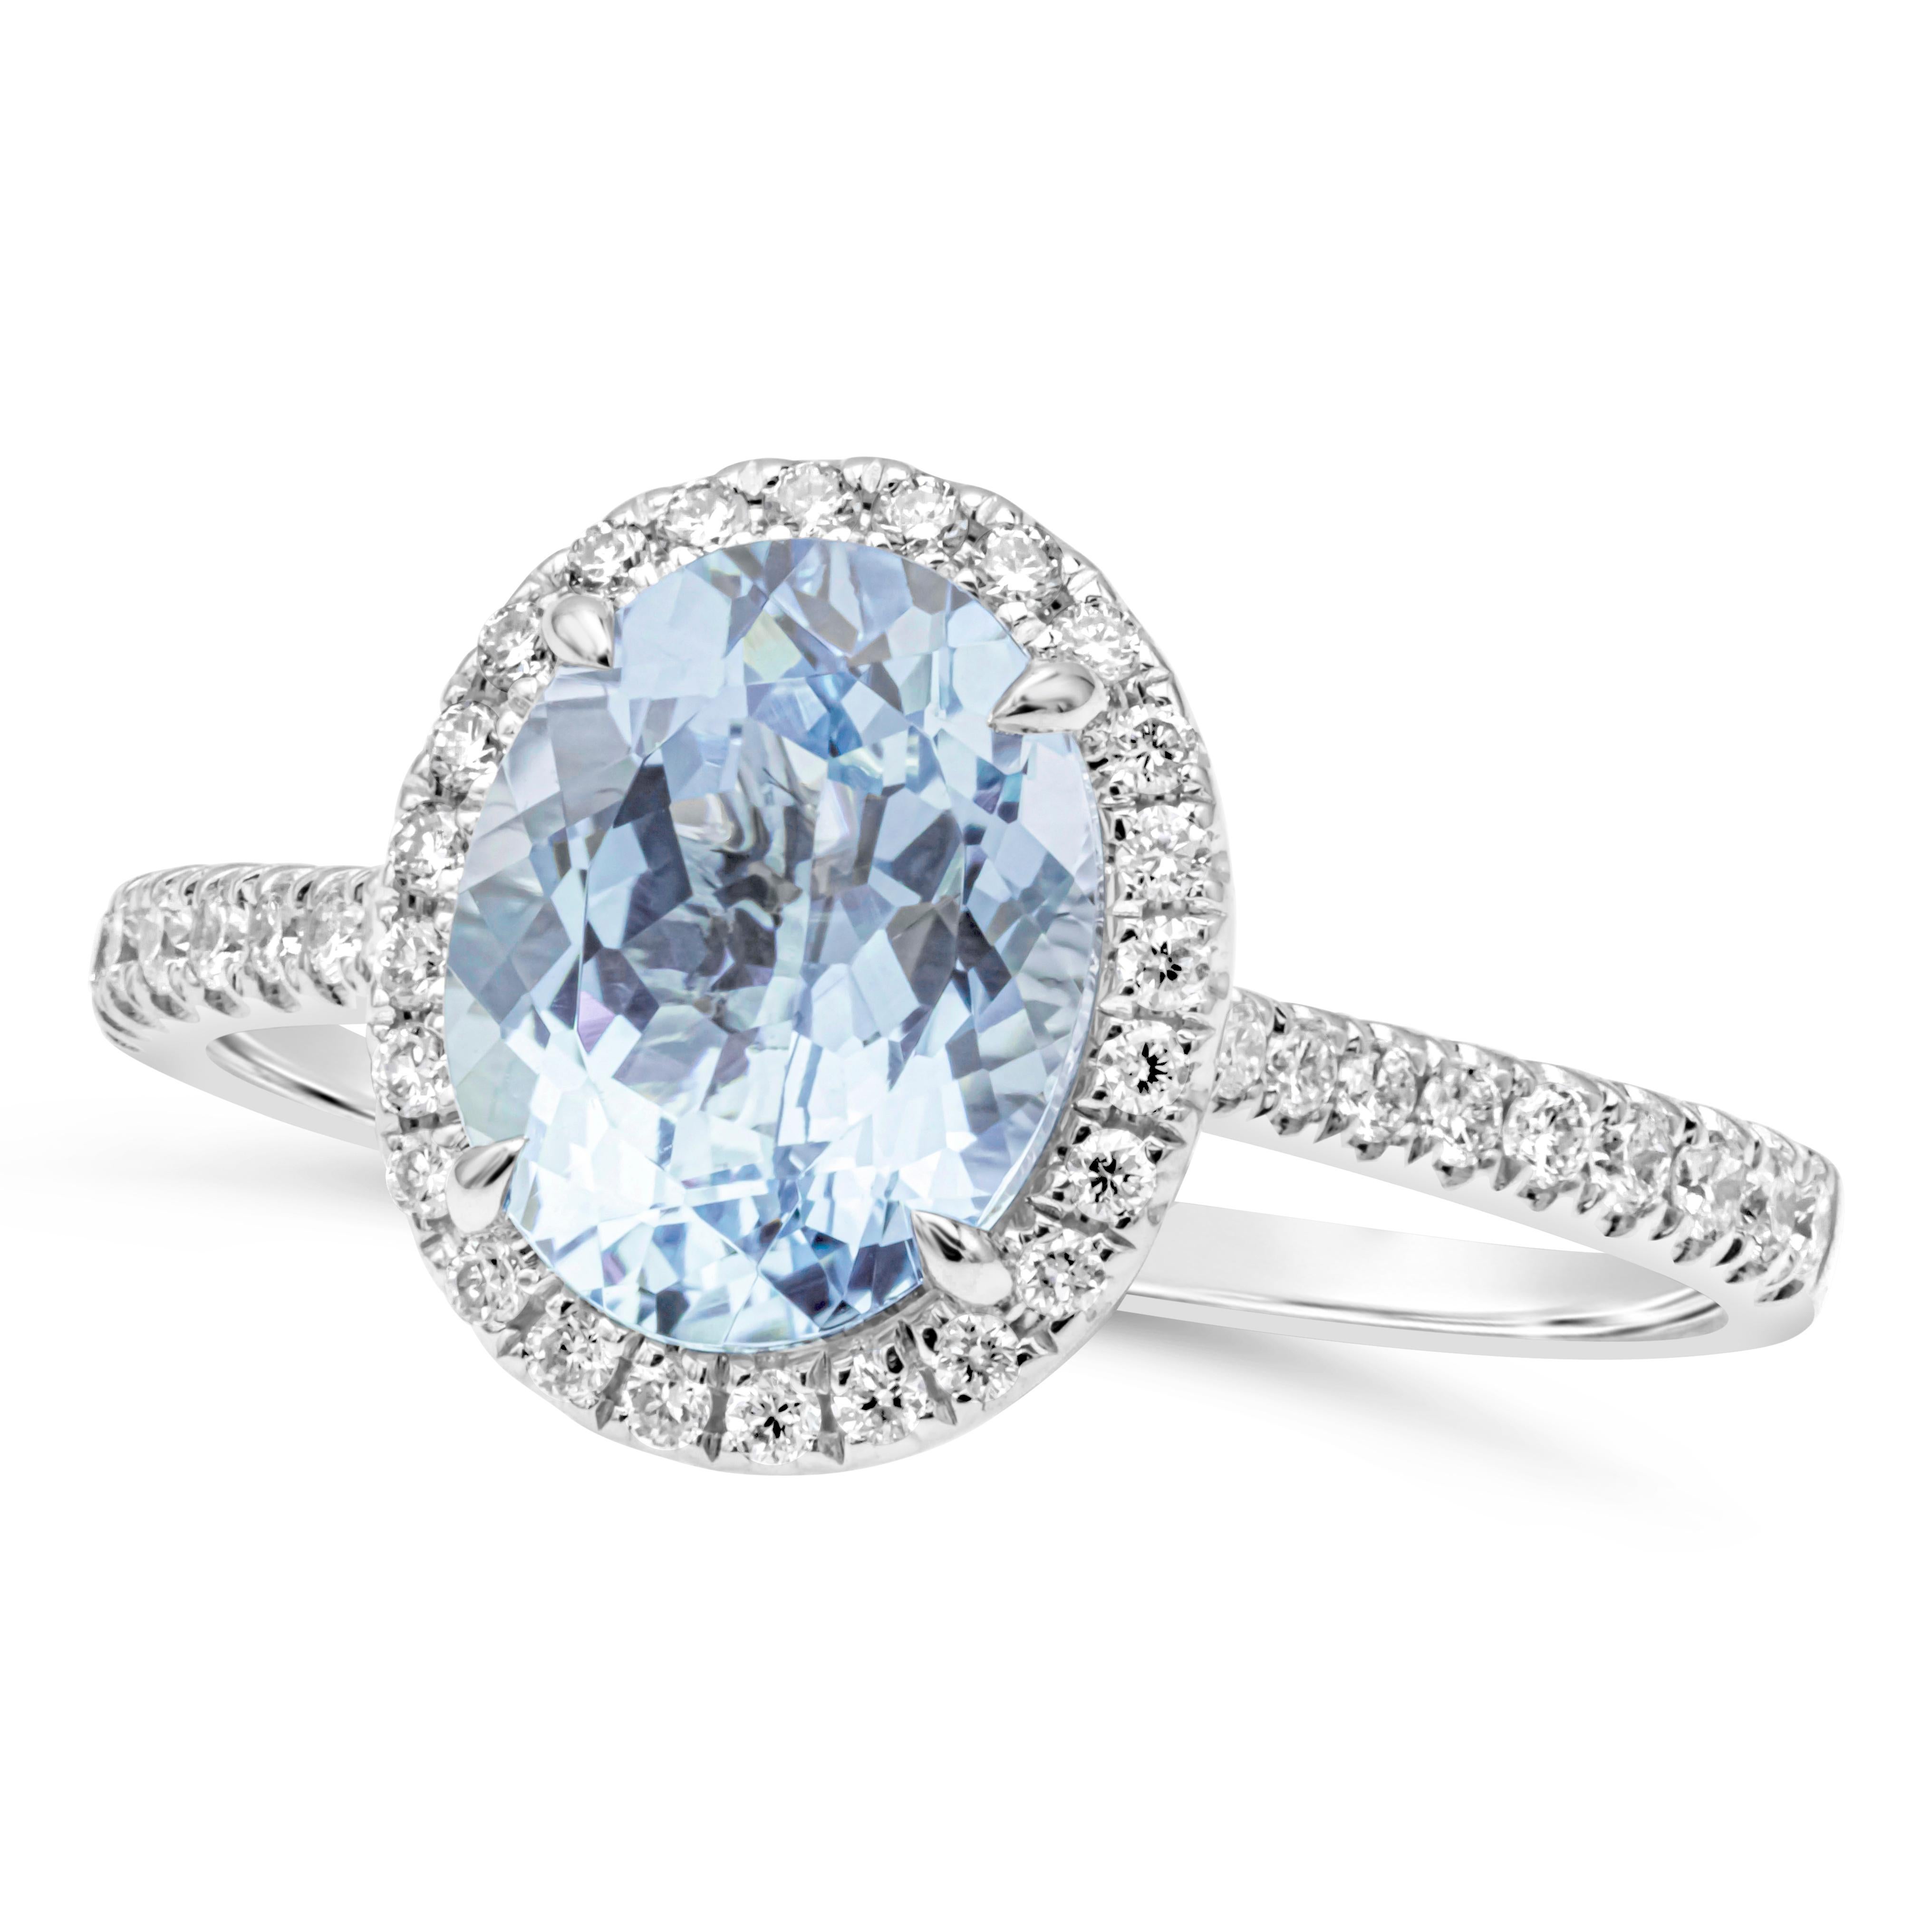 This versatile and beautiful halo engagement ring style showcasing an oval cut blue aquamarine weighing 1.69 carats total, set in a classic four prong setting. Elegantly surrounded by a row of brilliant round diamonds that continues on to the shank